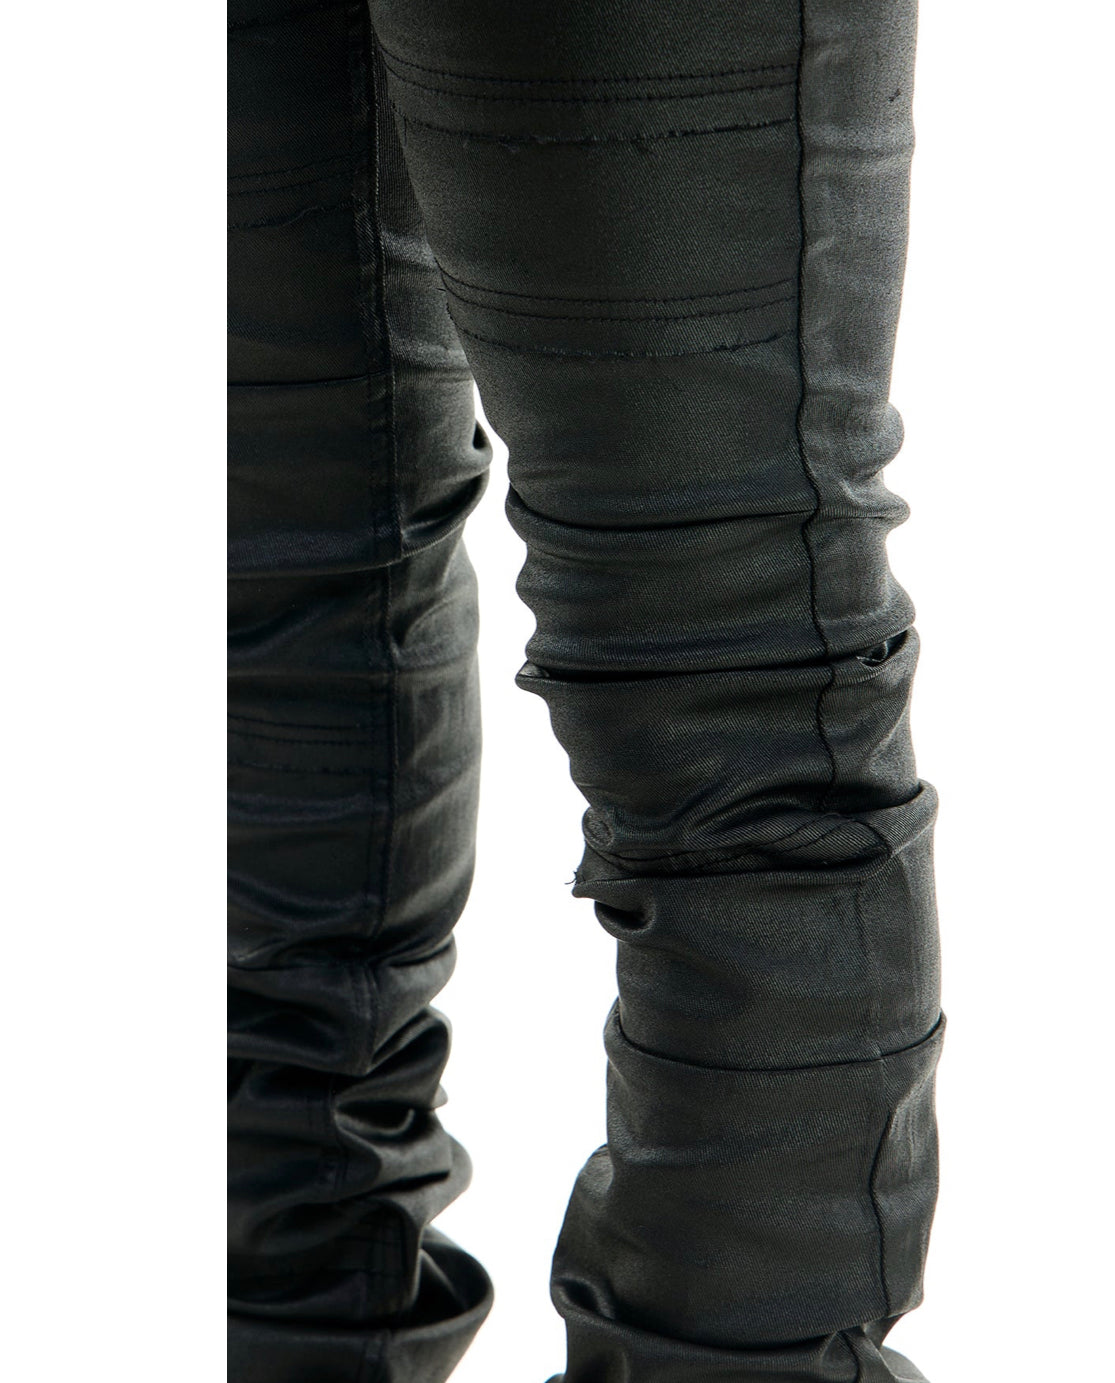 “NEW” KDNK Super Stacked Waxed Black Pants